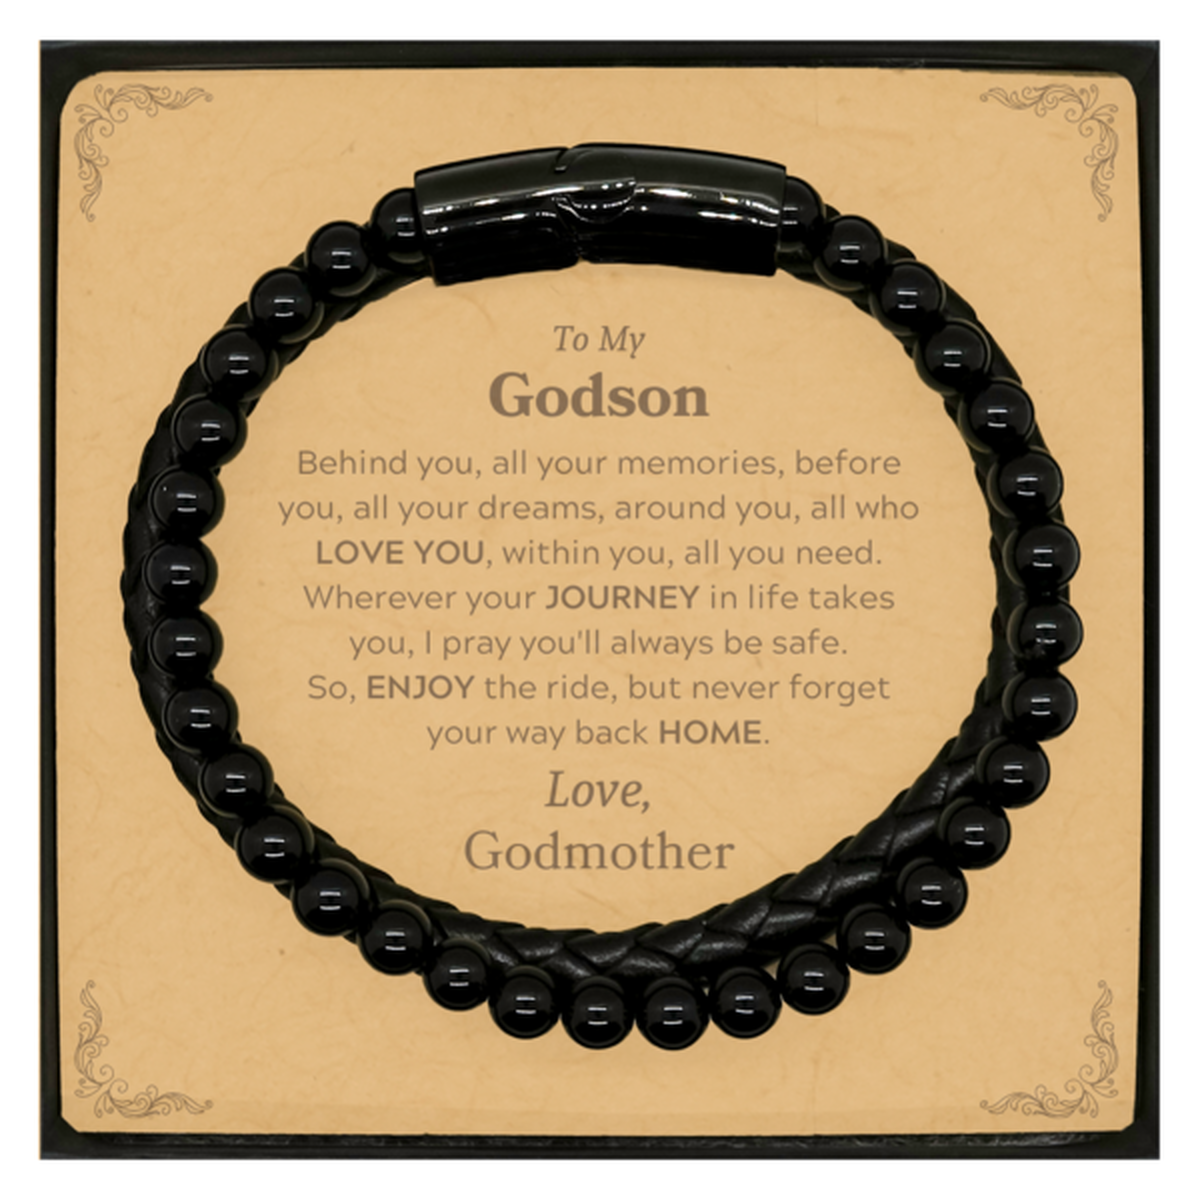 To My Godson Graduation Gifts from Godmother, Godson Stone Leather Bracelets Christmas Birthday Gifts for Godson Behind you, all your memories, before you, all your dreams. Love, Godmother